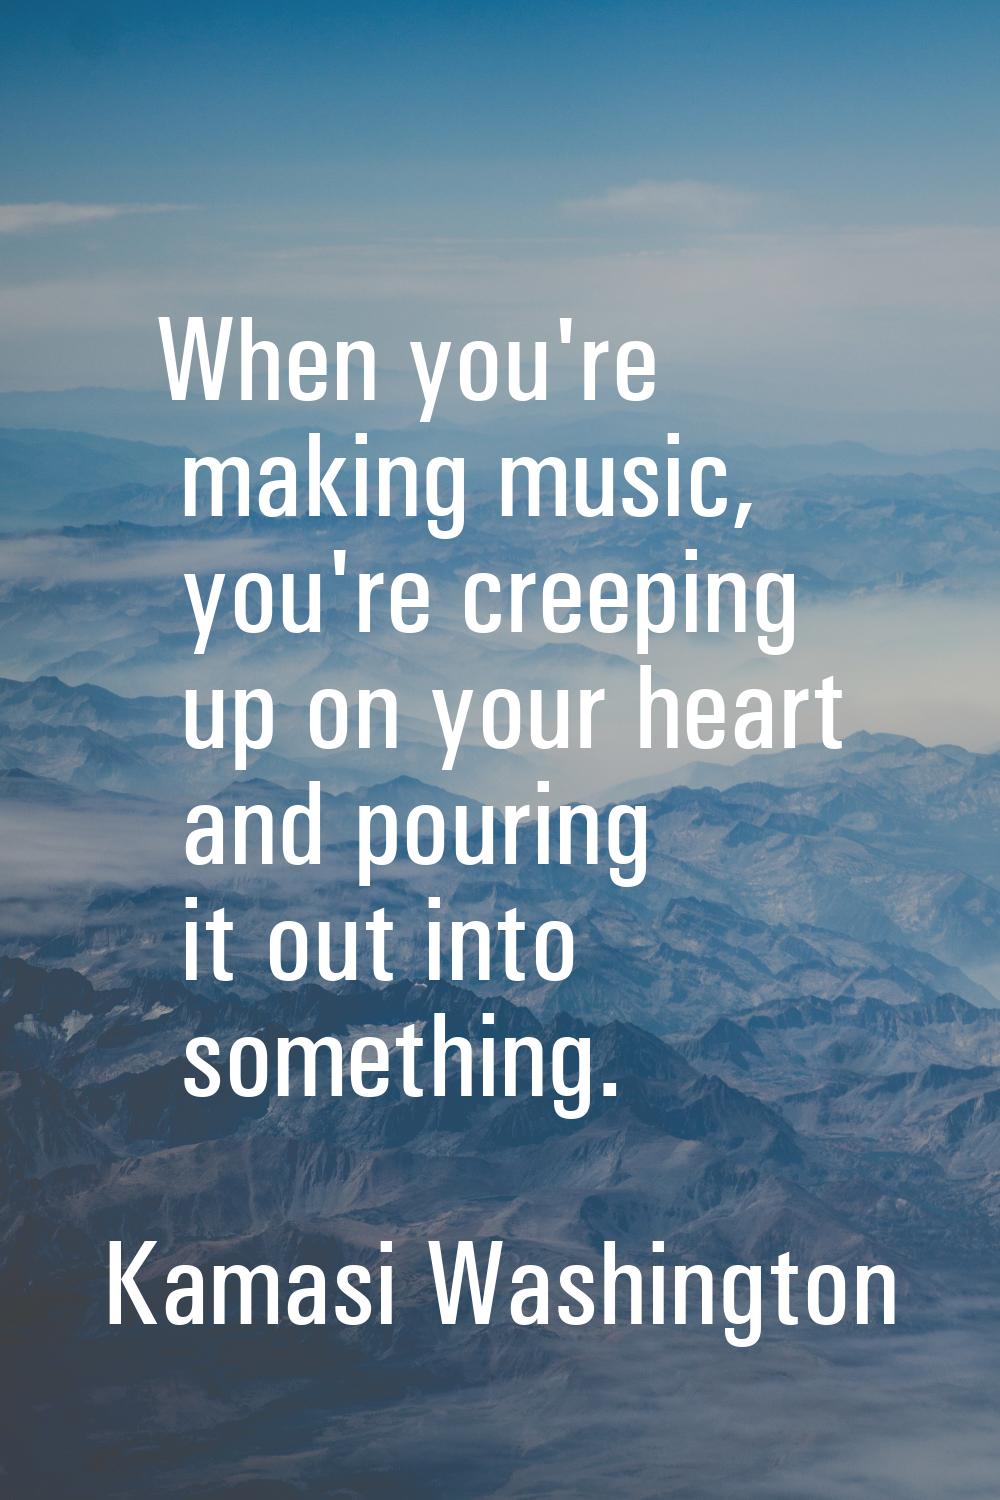 When you're making music, you're creeping up on your heart and pouring it out into something.